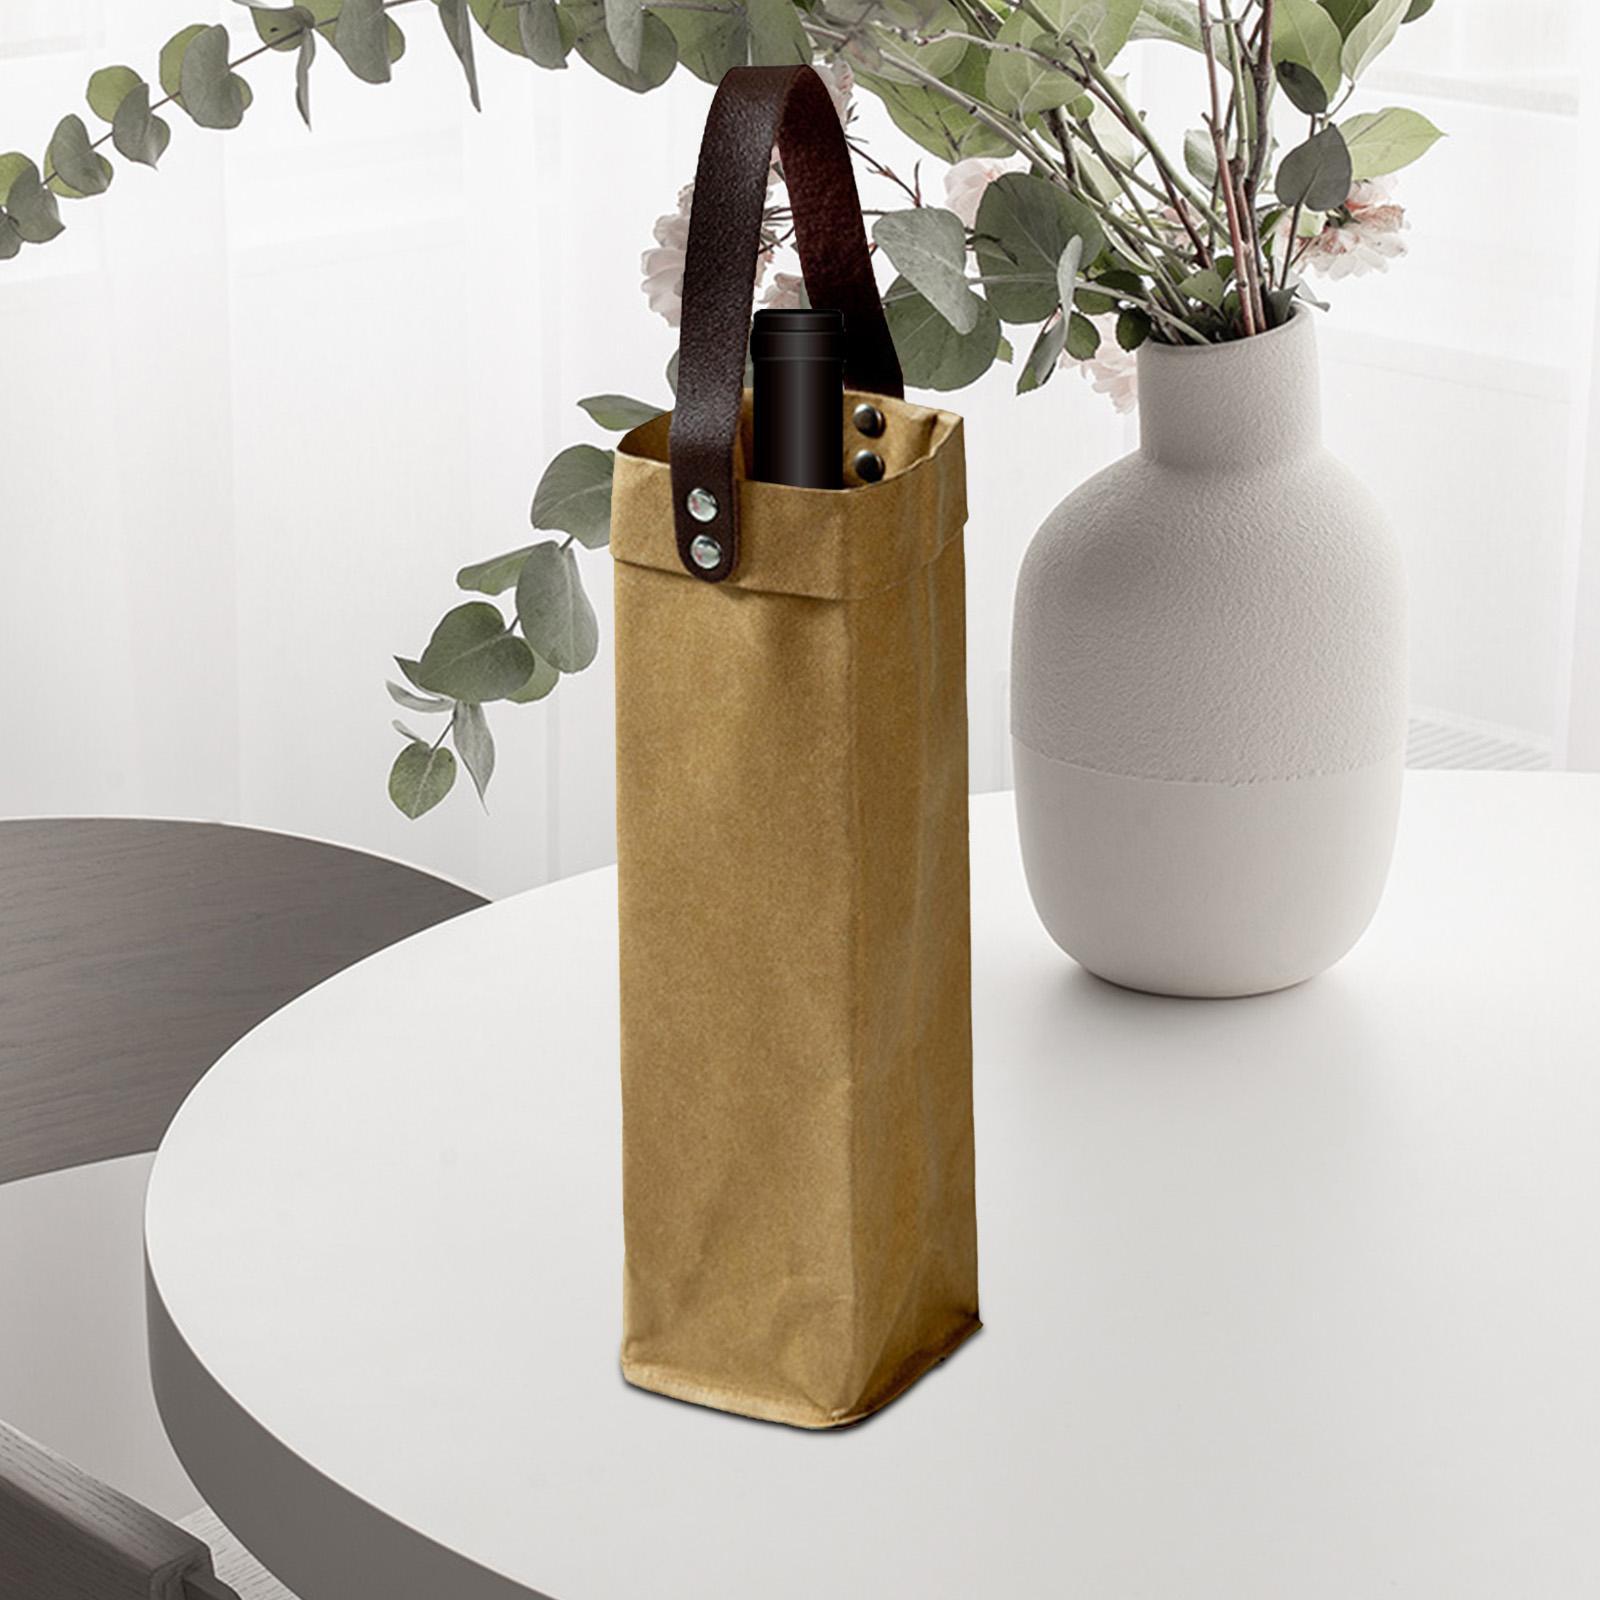 Bottles Bags Storage Bag Shopping Bags Wrapping Bag Gift Bag for Birthday Valentine